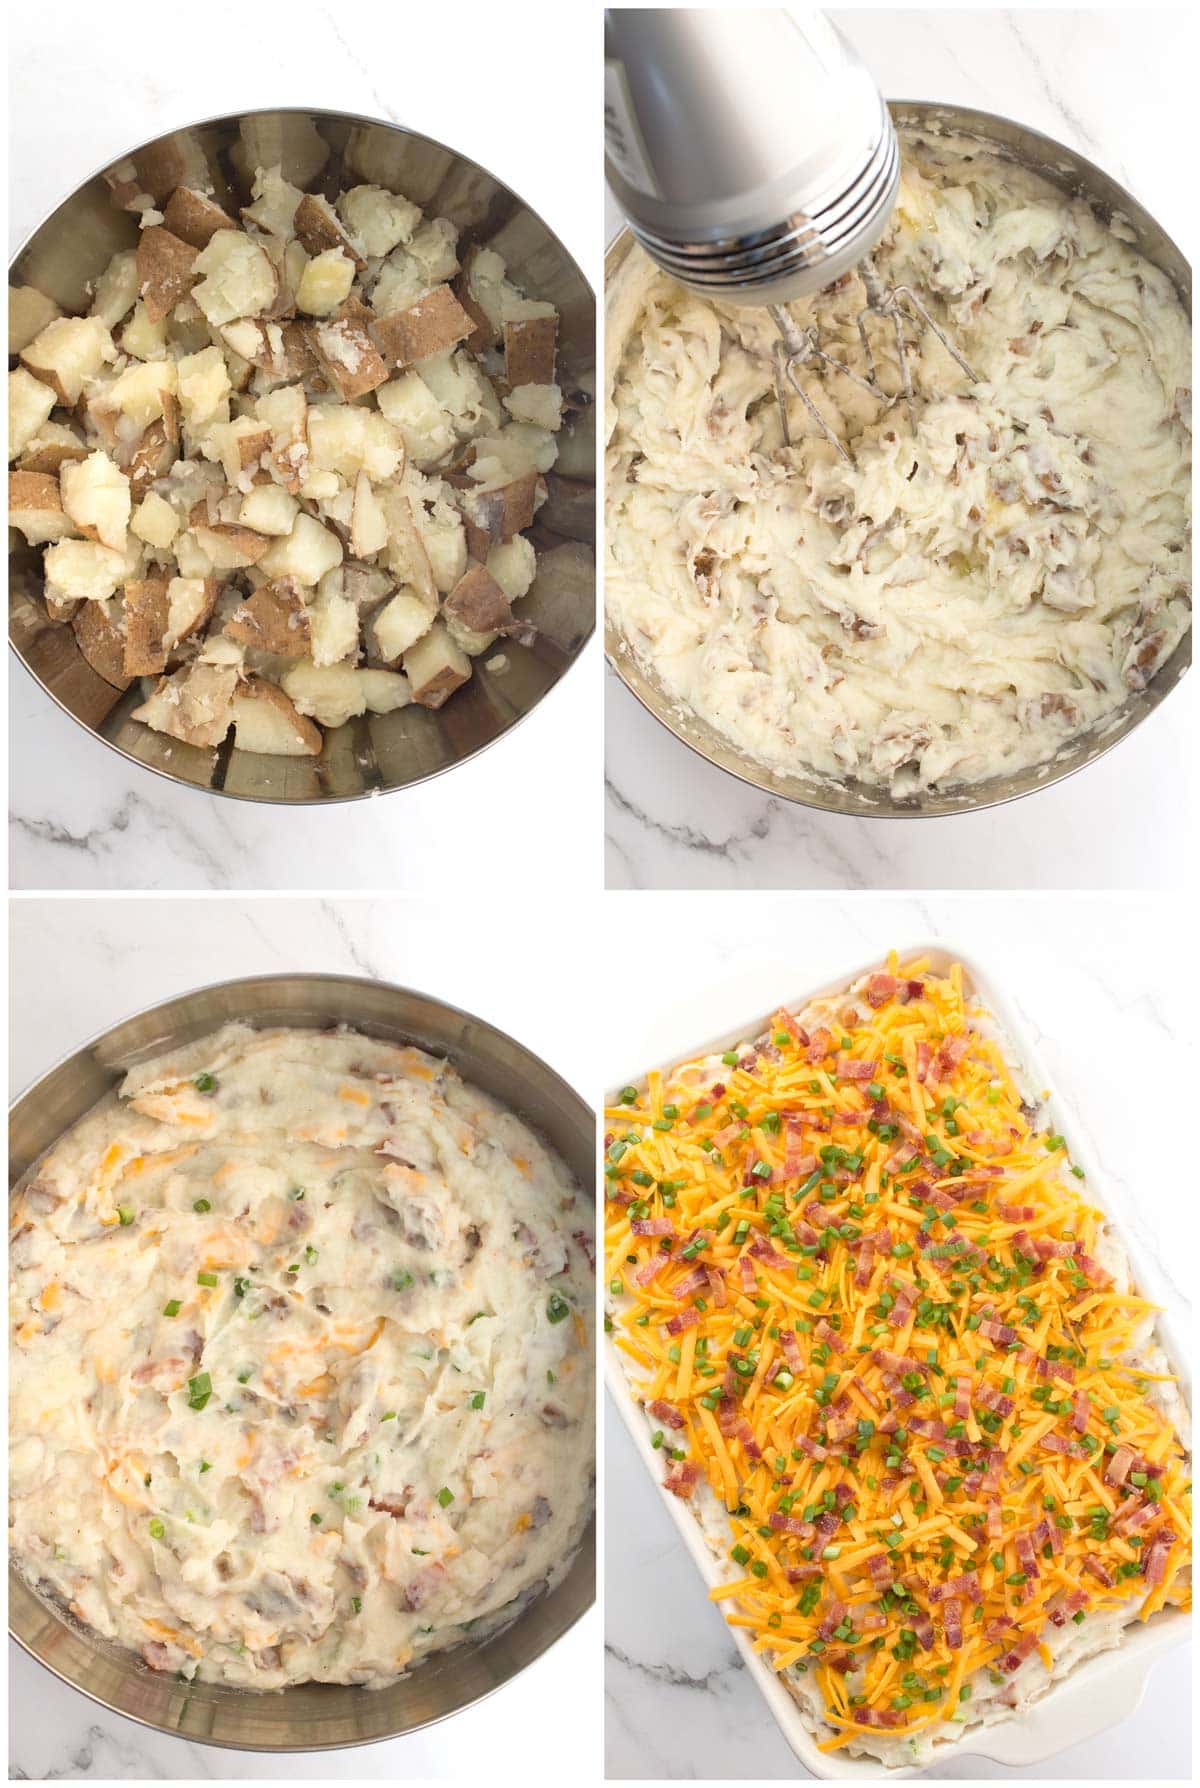 Boiled potatoes in a bowl (photo 1), potatoes mashed (photo 2), fillings mixed in (photo 3), and potatoes in casserole dish with cheese and bacon on top (photo 4).